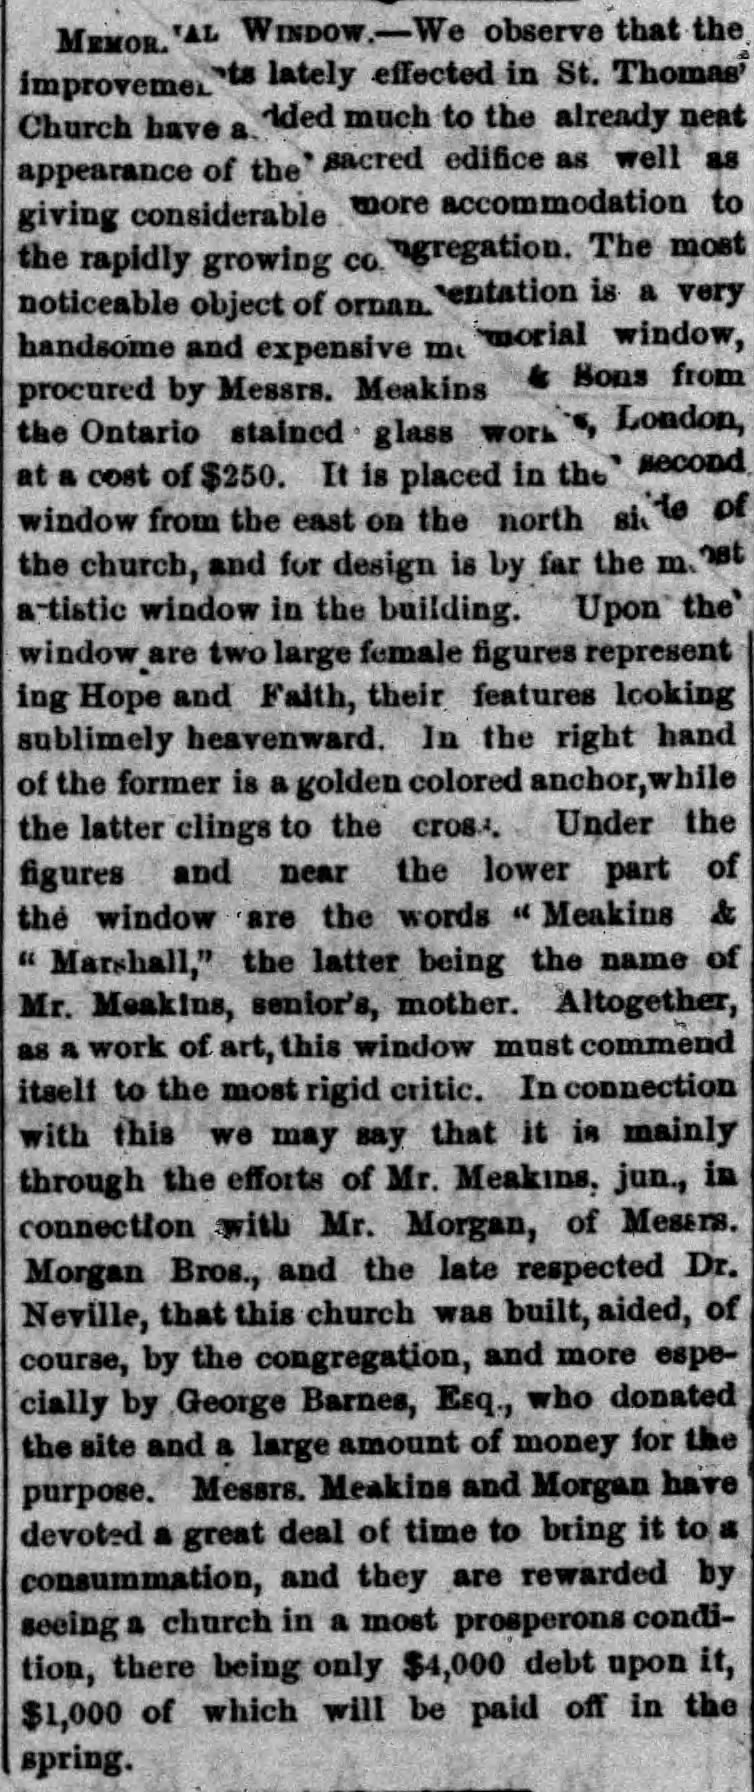 1872 C.W. Meakins placed a memorial window for his parents Meakins & Marshall at St. Thomas' Church.